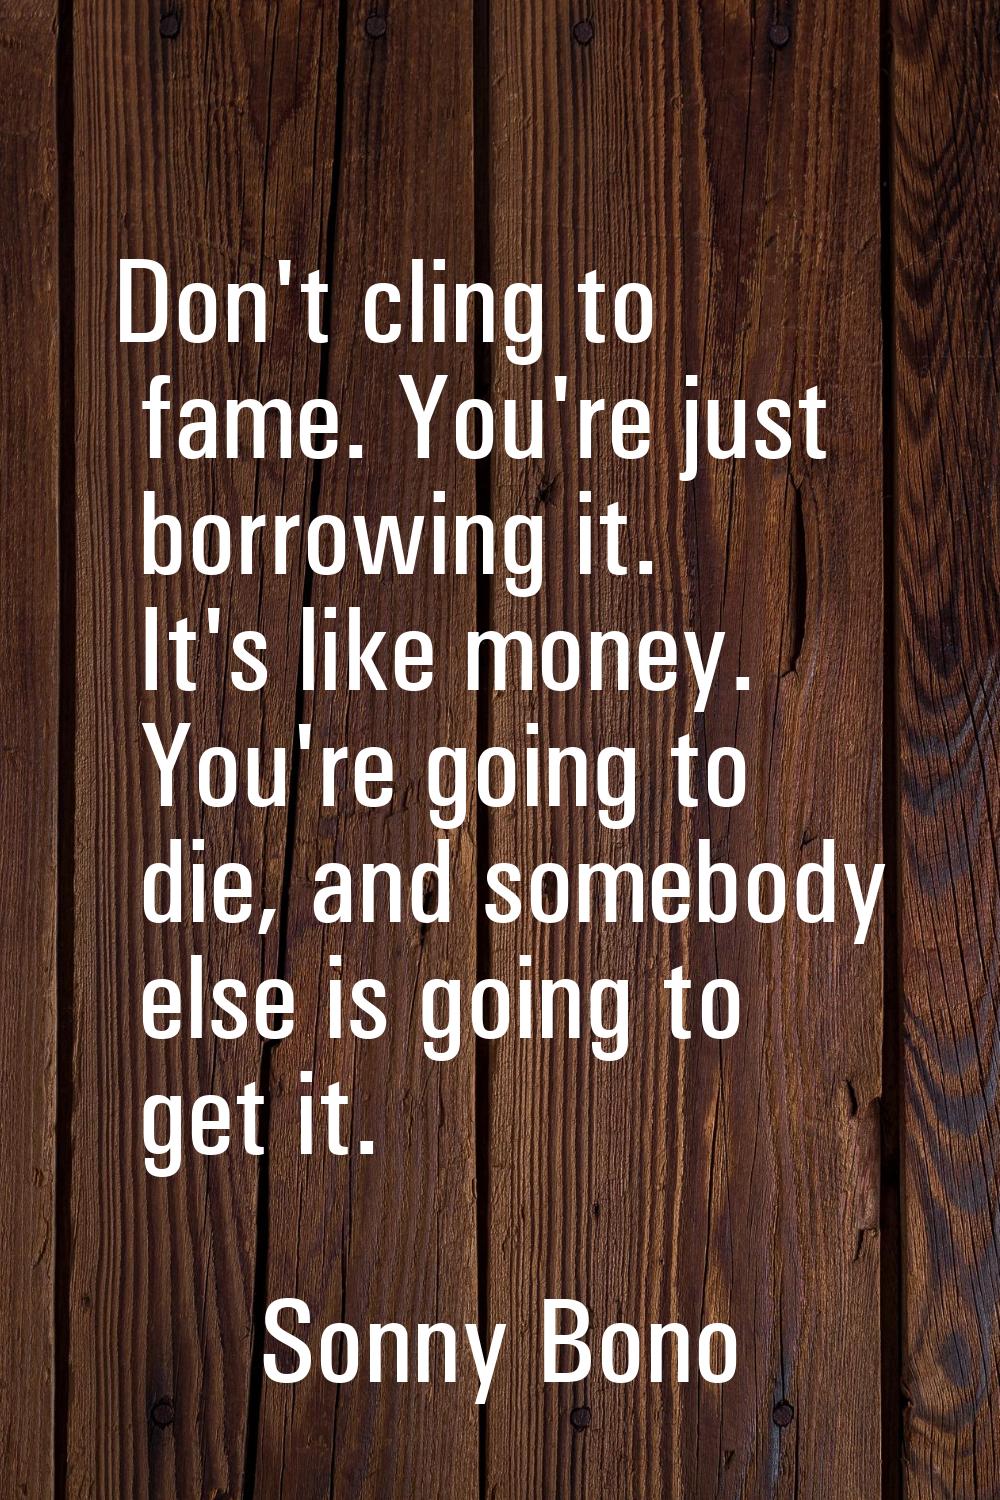 Don't cling to fame. You're just borrowing it. It's like money. You're going to die, and somebody e